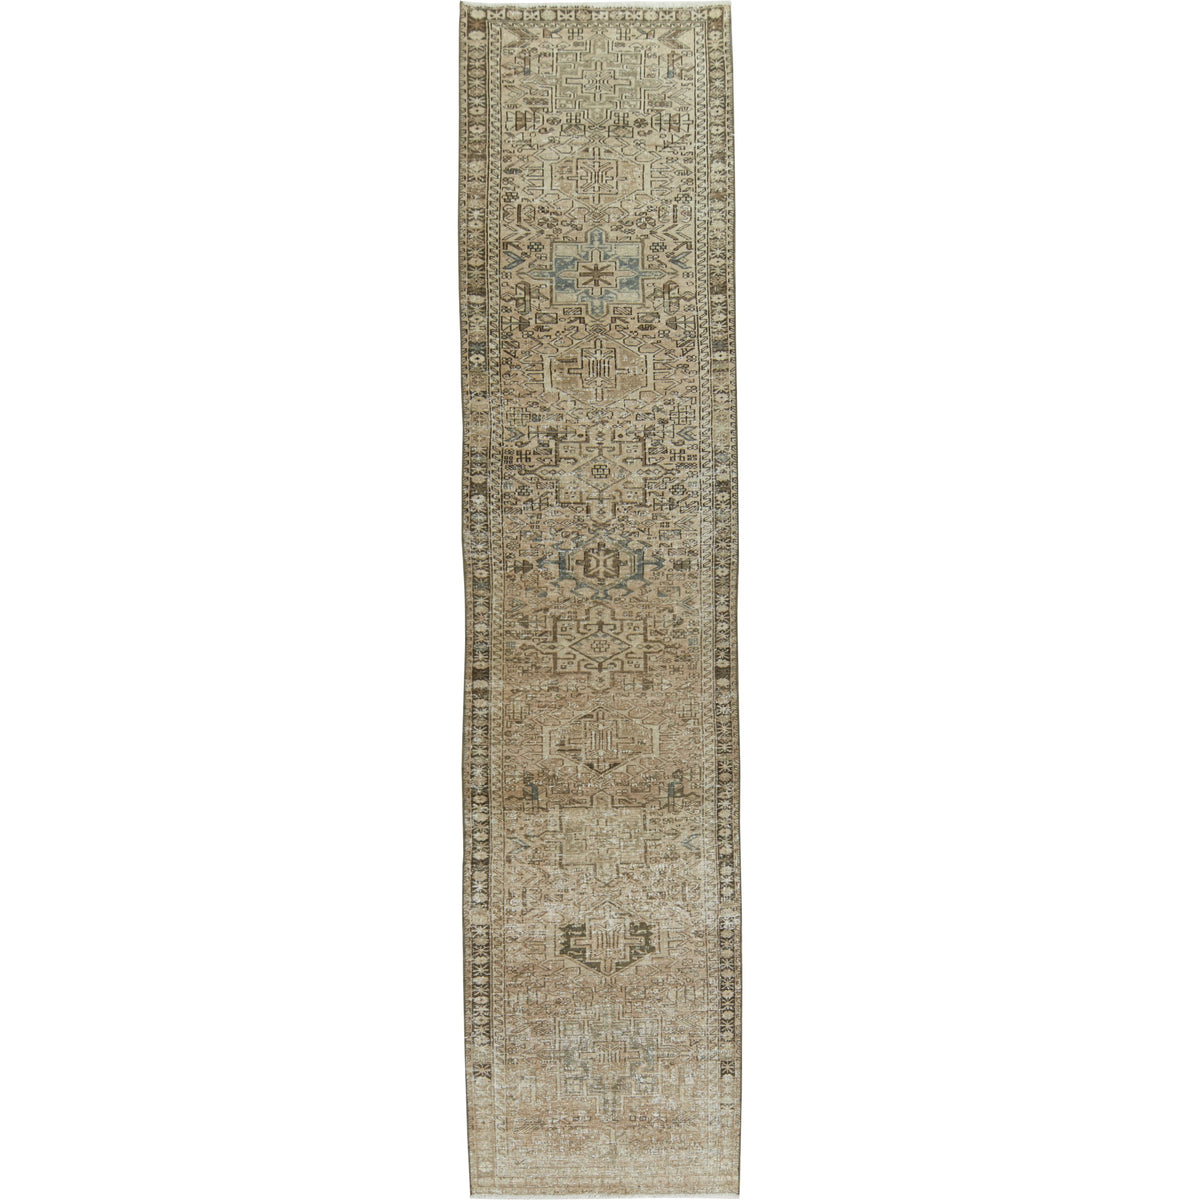 Nissim | The Essence of Elegance in Every Thread | Kuden Rugs